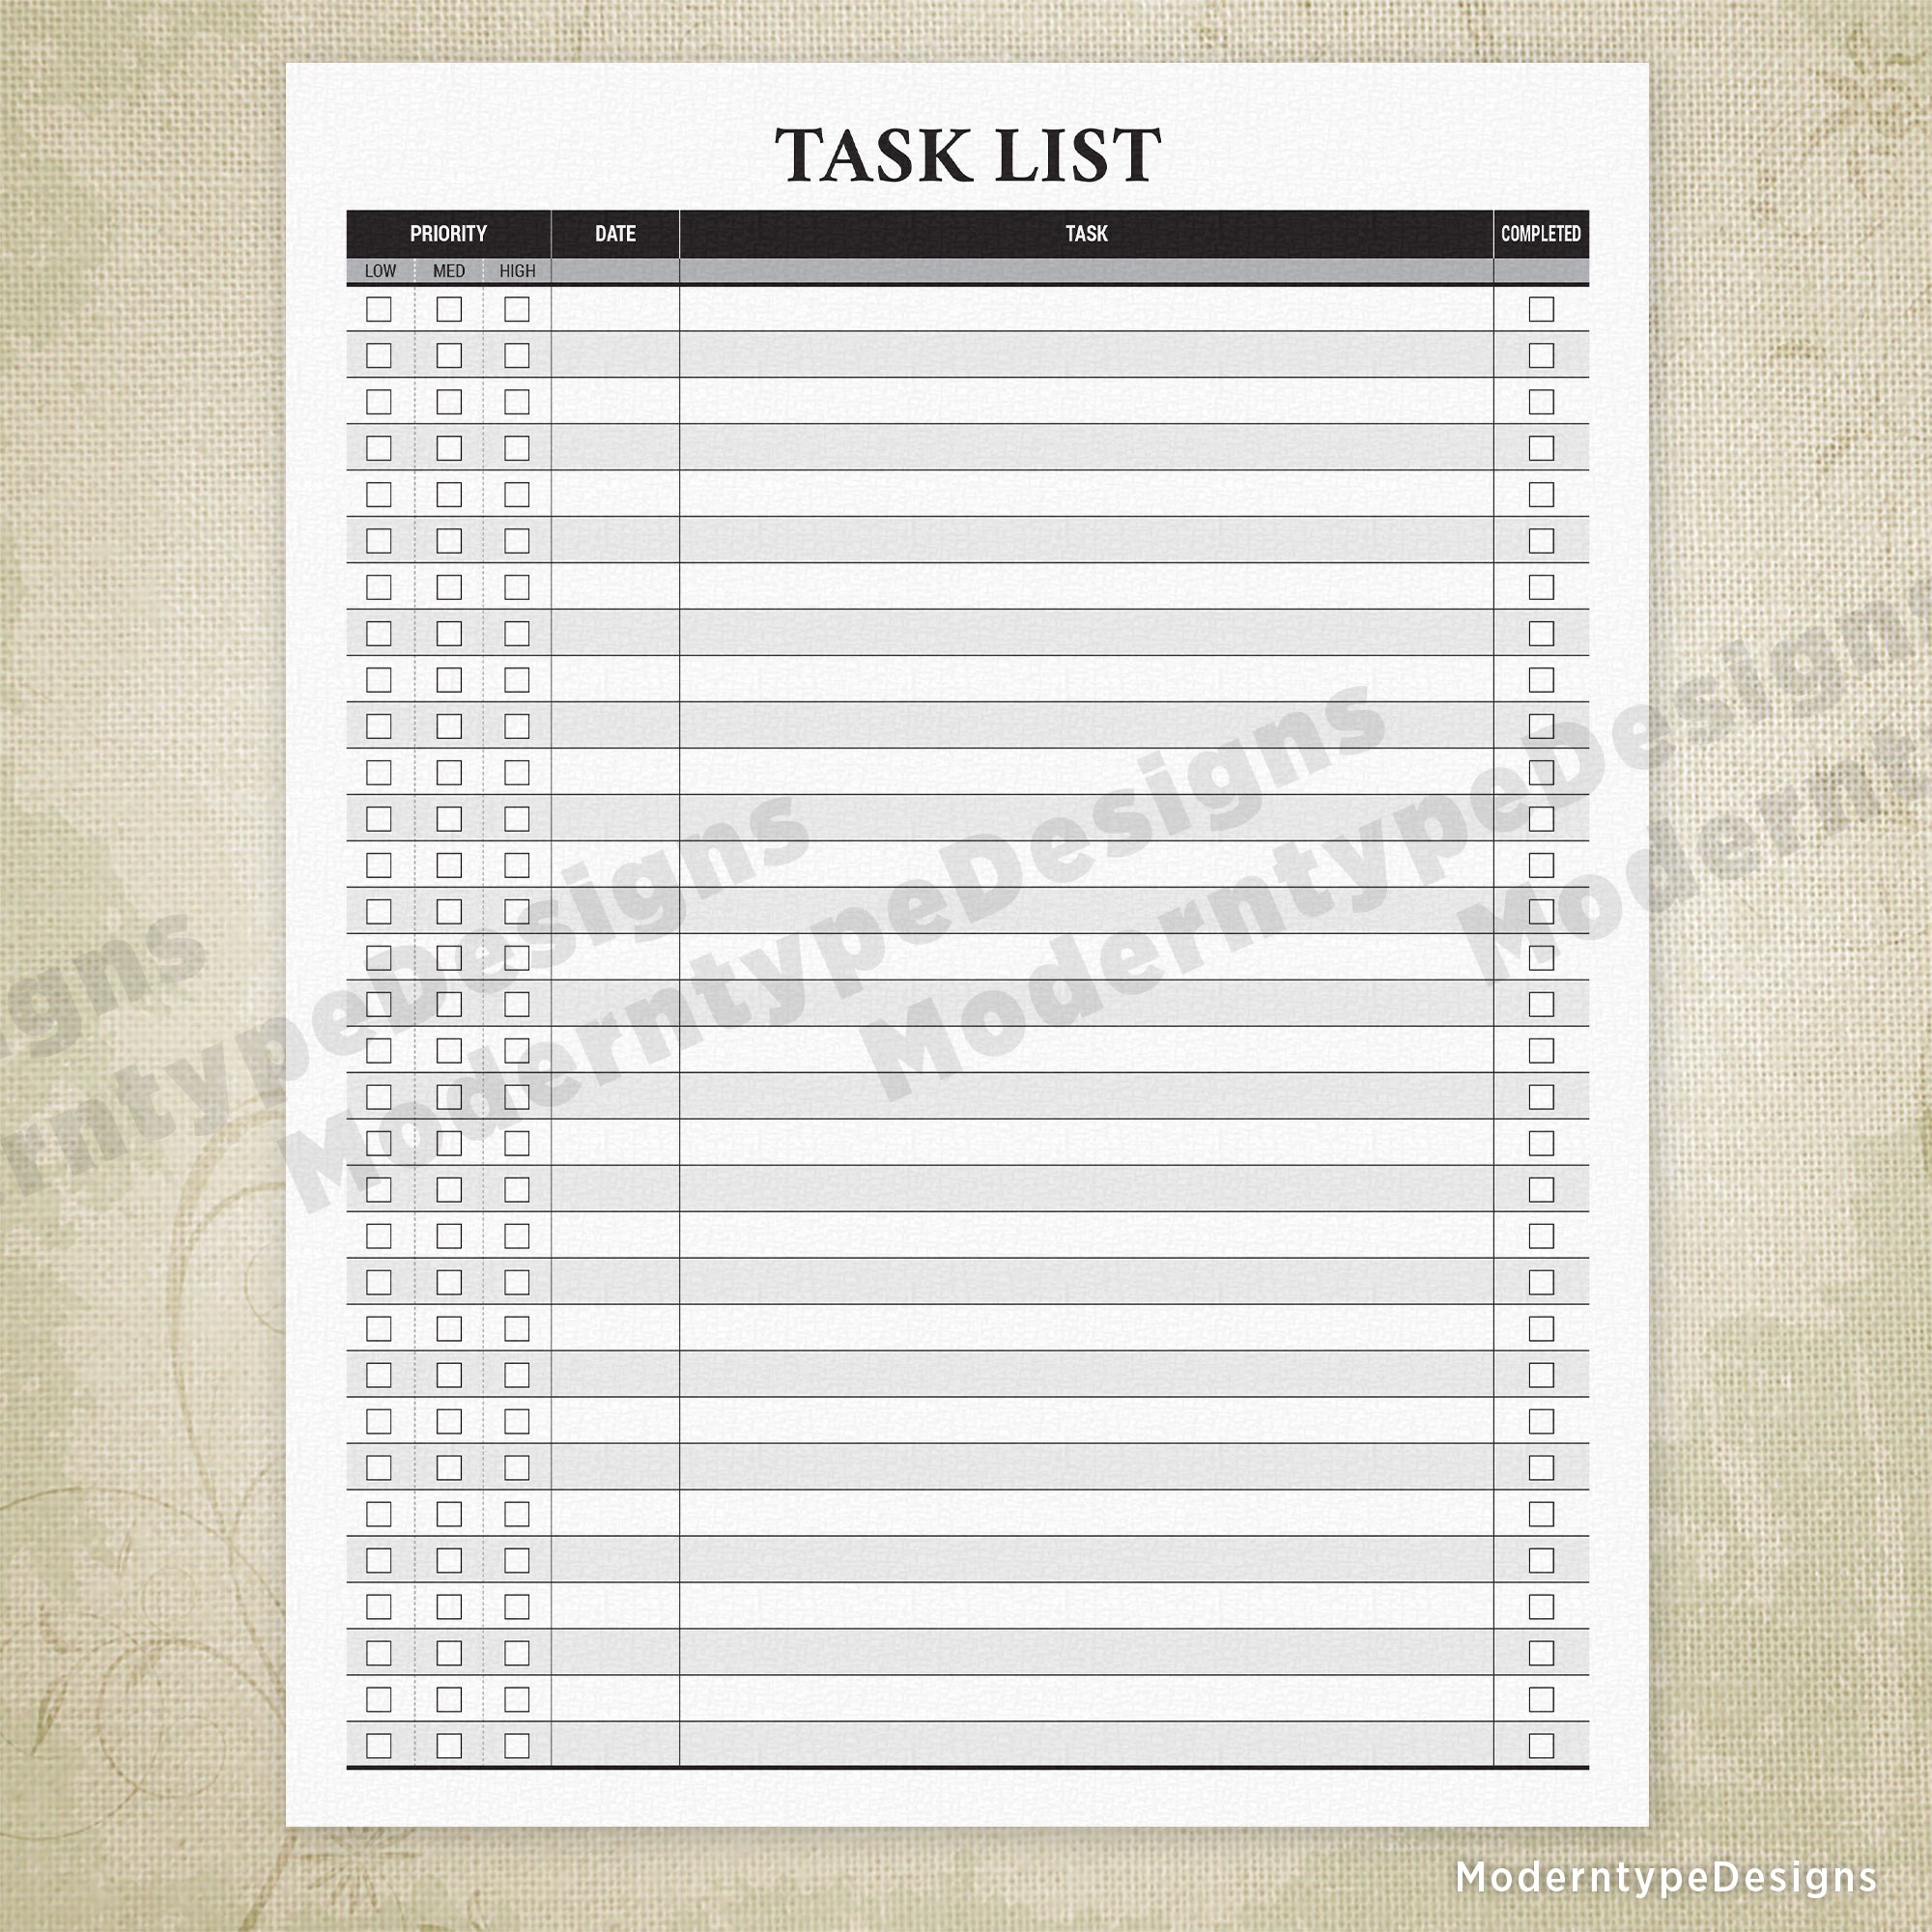 Task List Printable with Priority